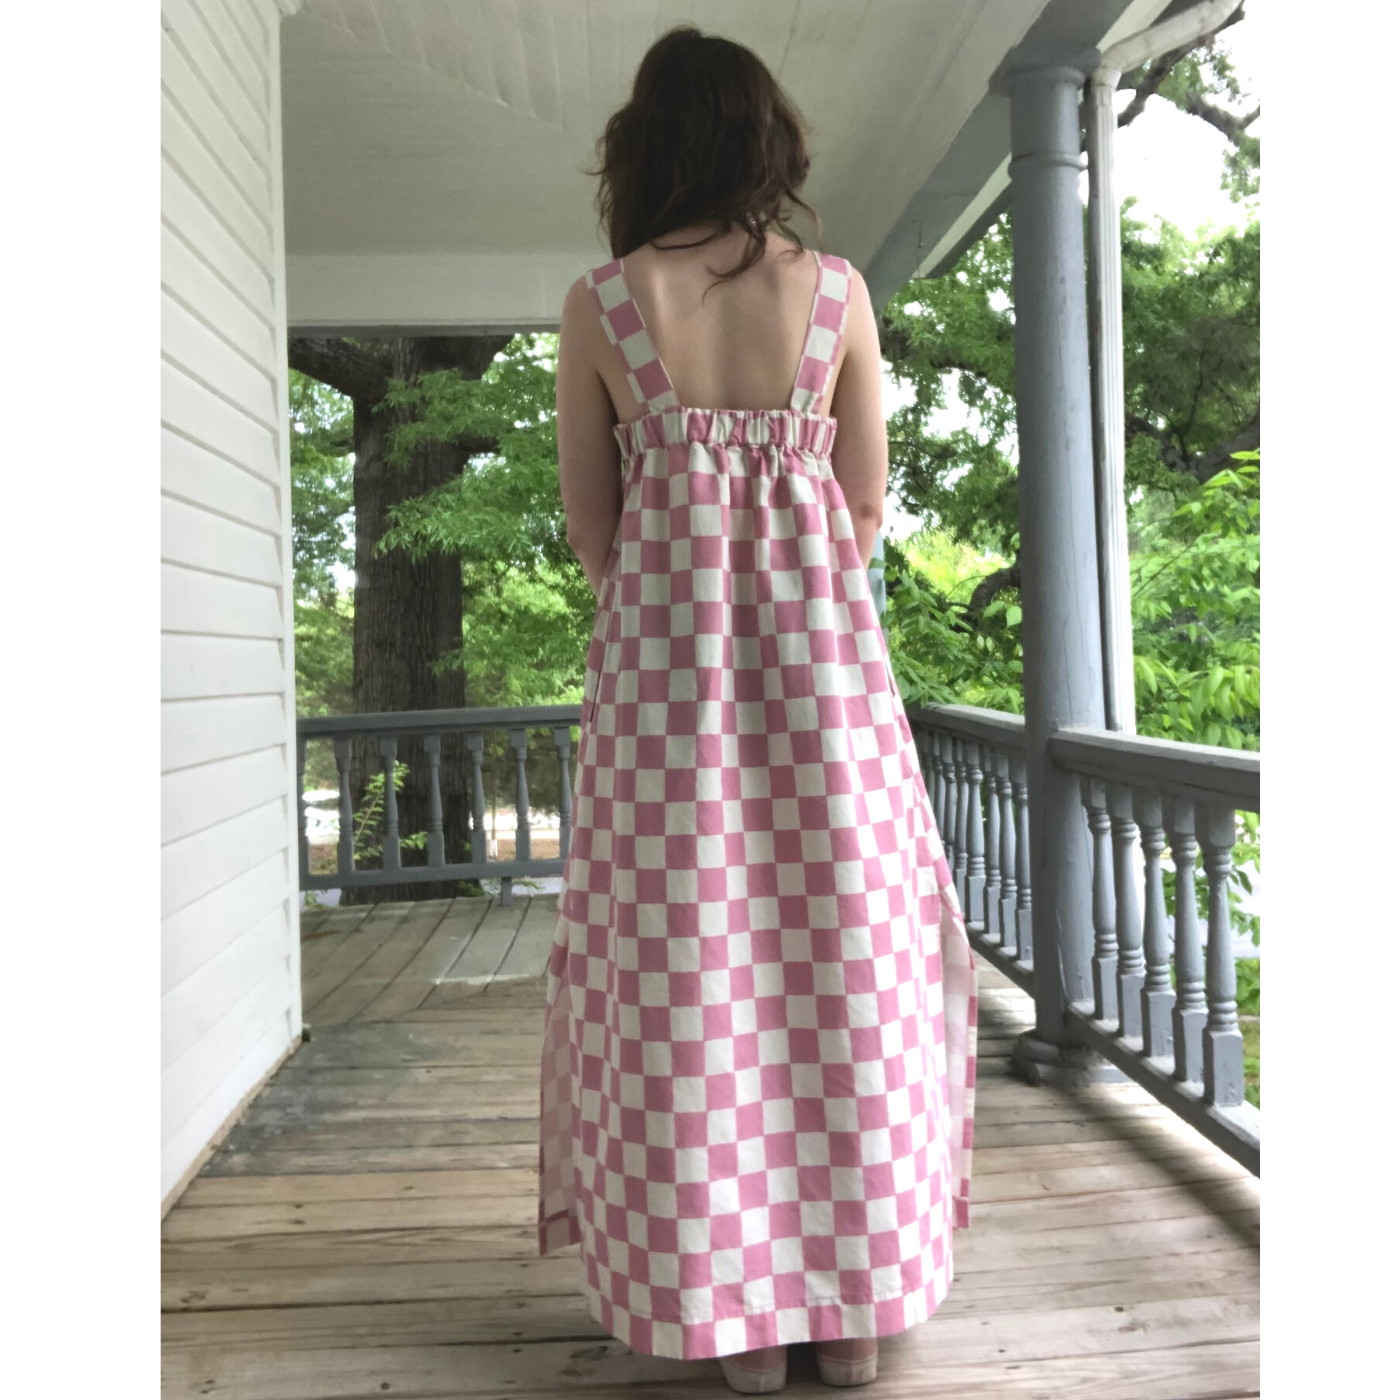 Lizard stands on a front porch with white walls, ceiling and railing and a wooden floor with their back to the camera. Their long maxi dress is down to their ankles and features a white-and-pink checkerboard design.